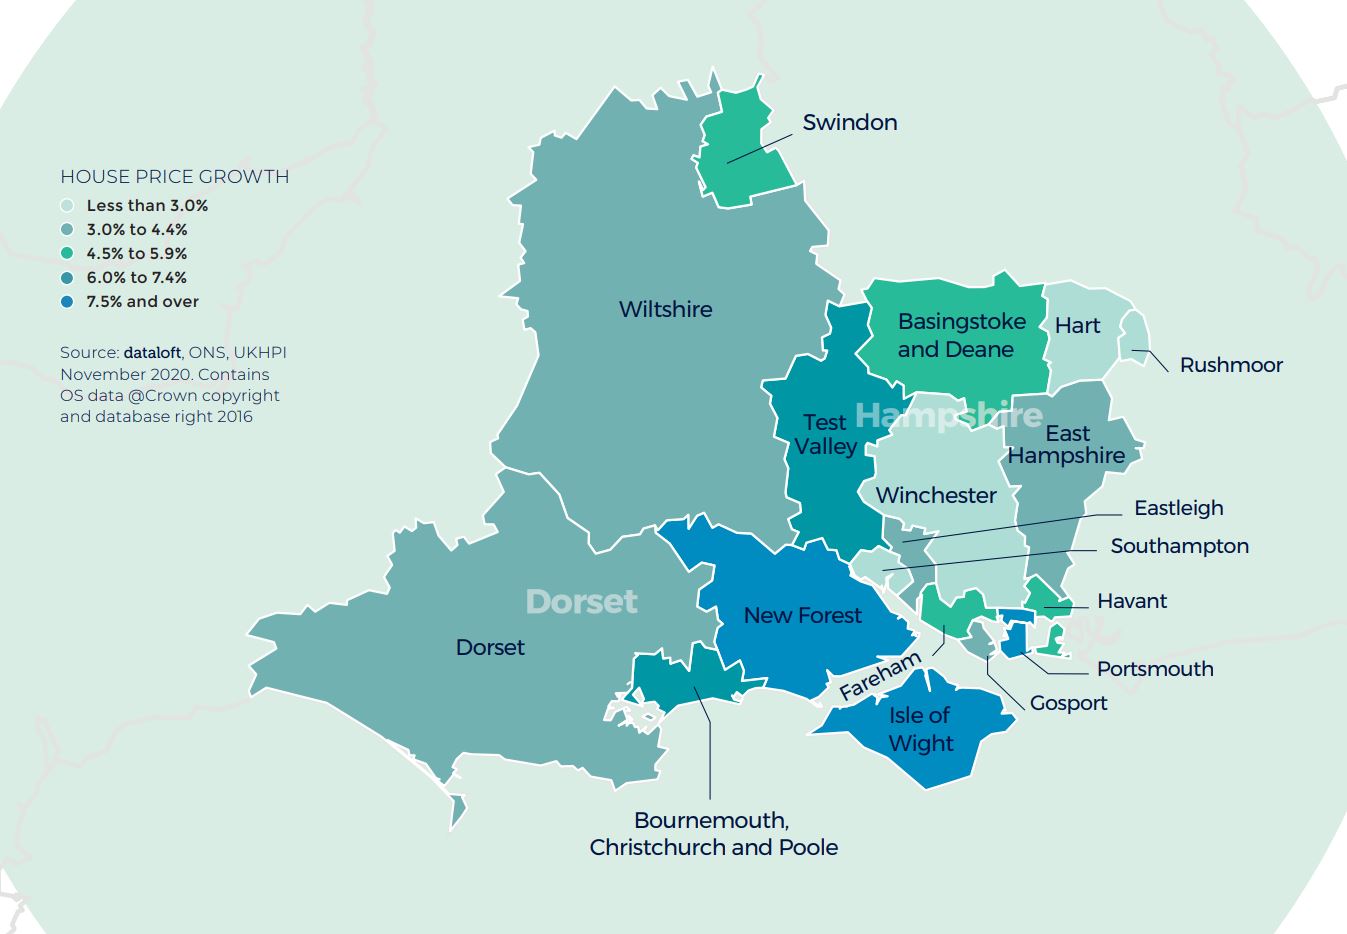 southern regional property market report house price growth